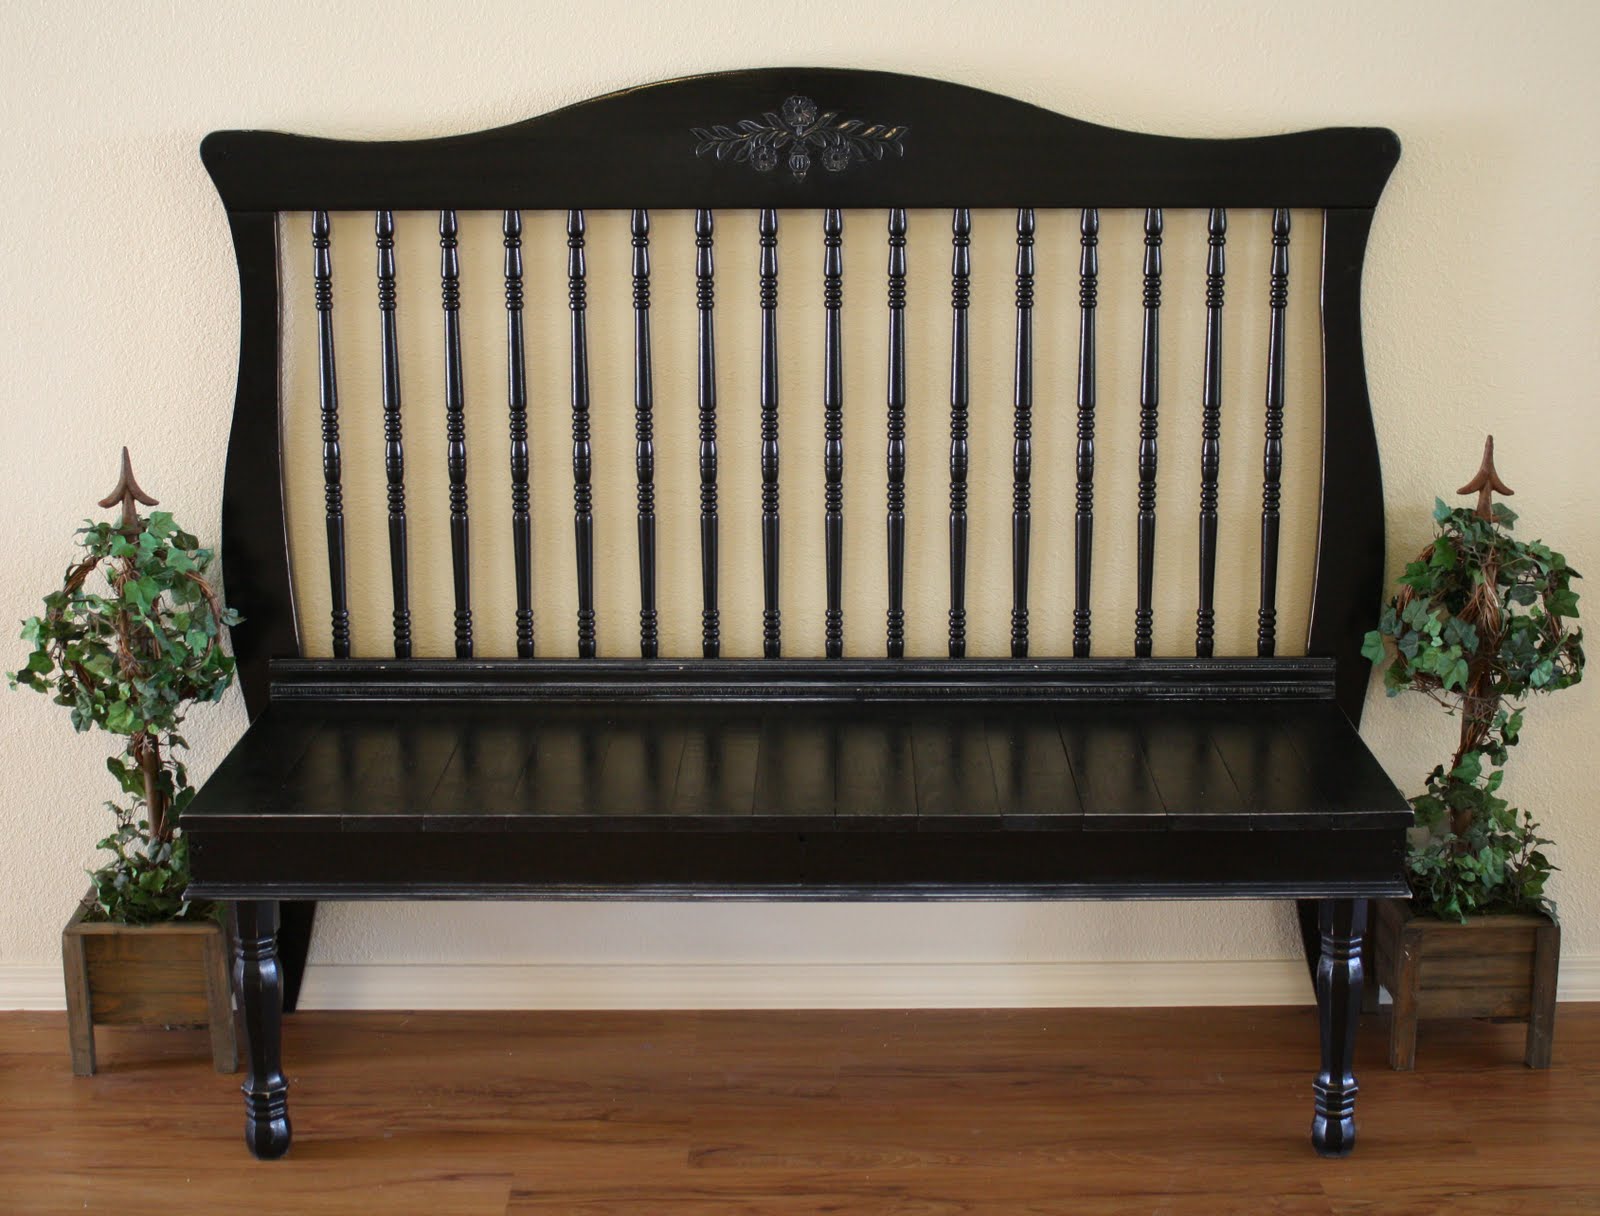 20+ Creative Ideas and DIY Projects to Repurpose Old Furniture --> Turn a Crib into a Bench